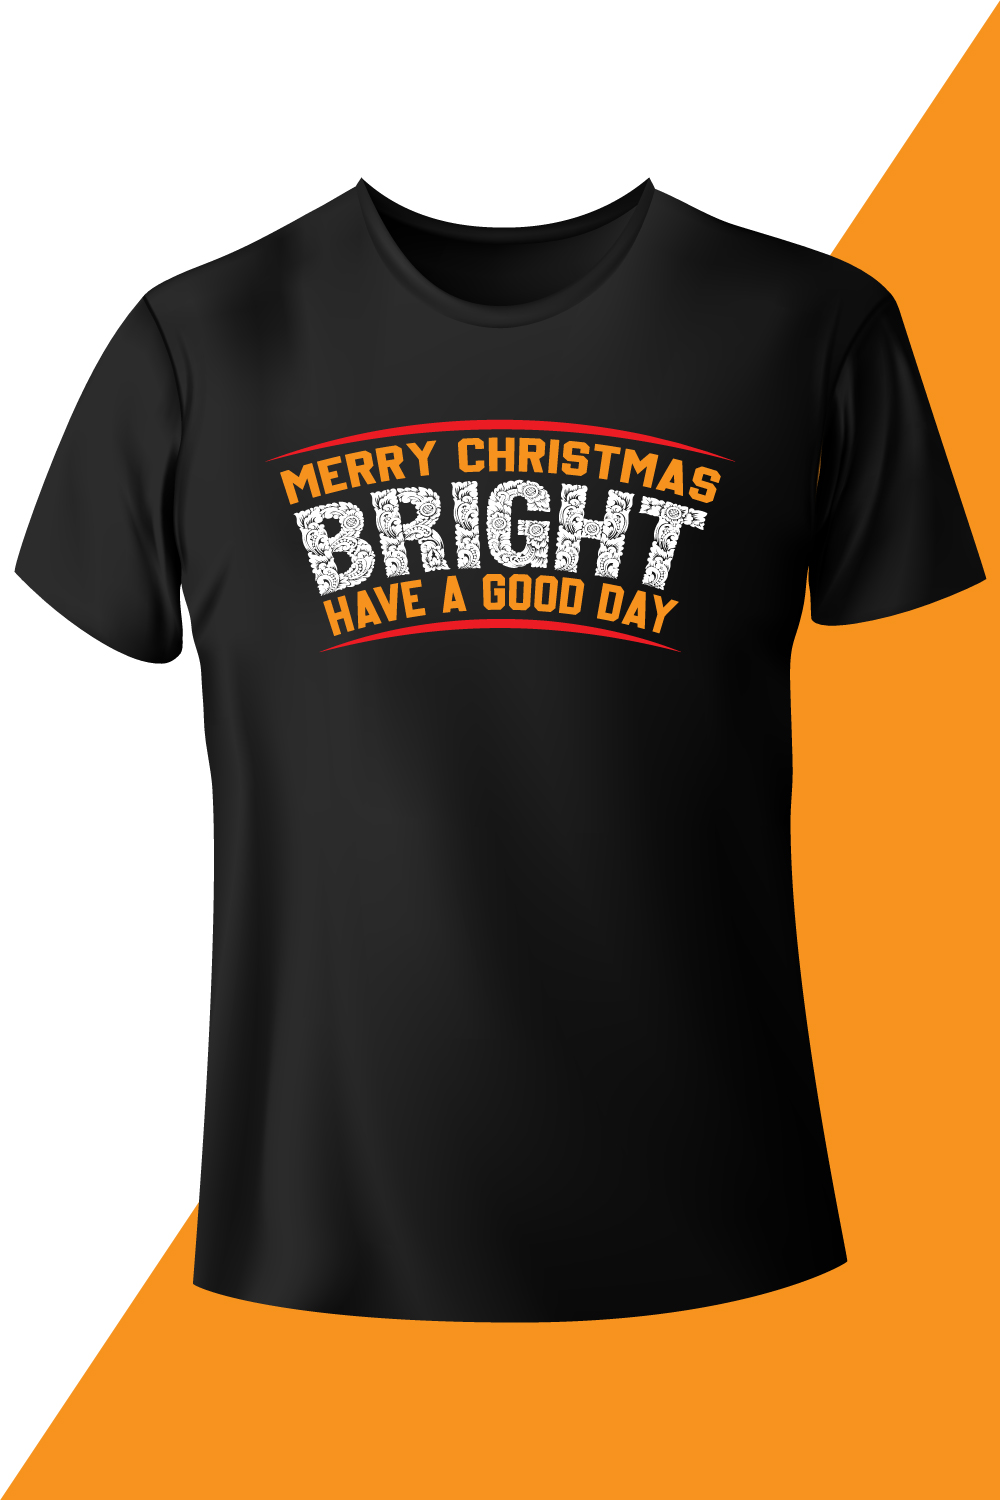 Image with a black T-shirt with a wonderful inscription merry christmas bright have a good day.